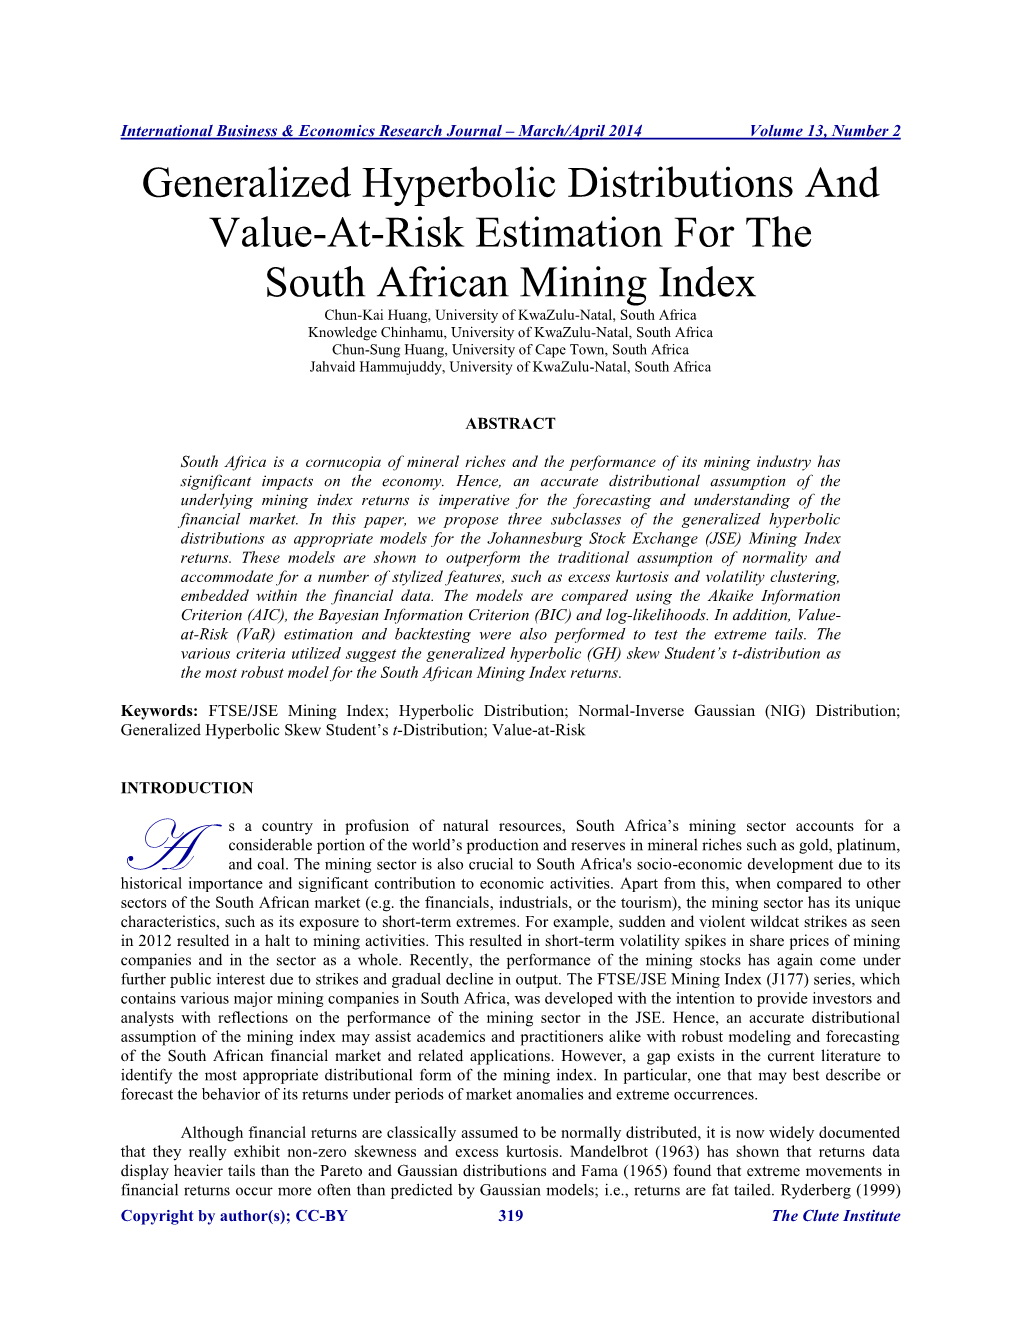 Generalized Hyperbolic Distributions and Value-At-Risk Estimation For